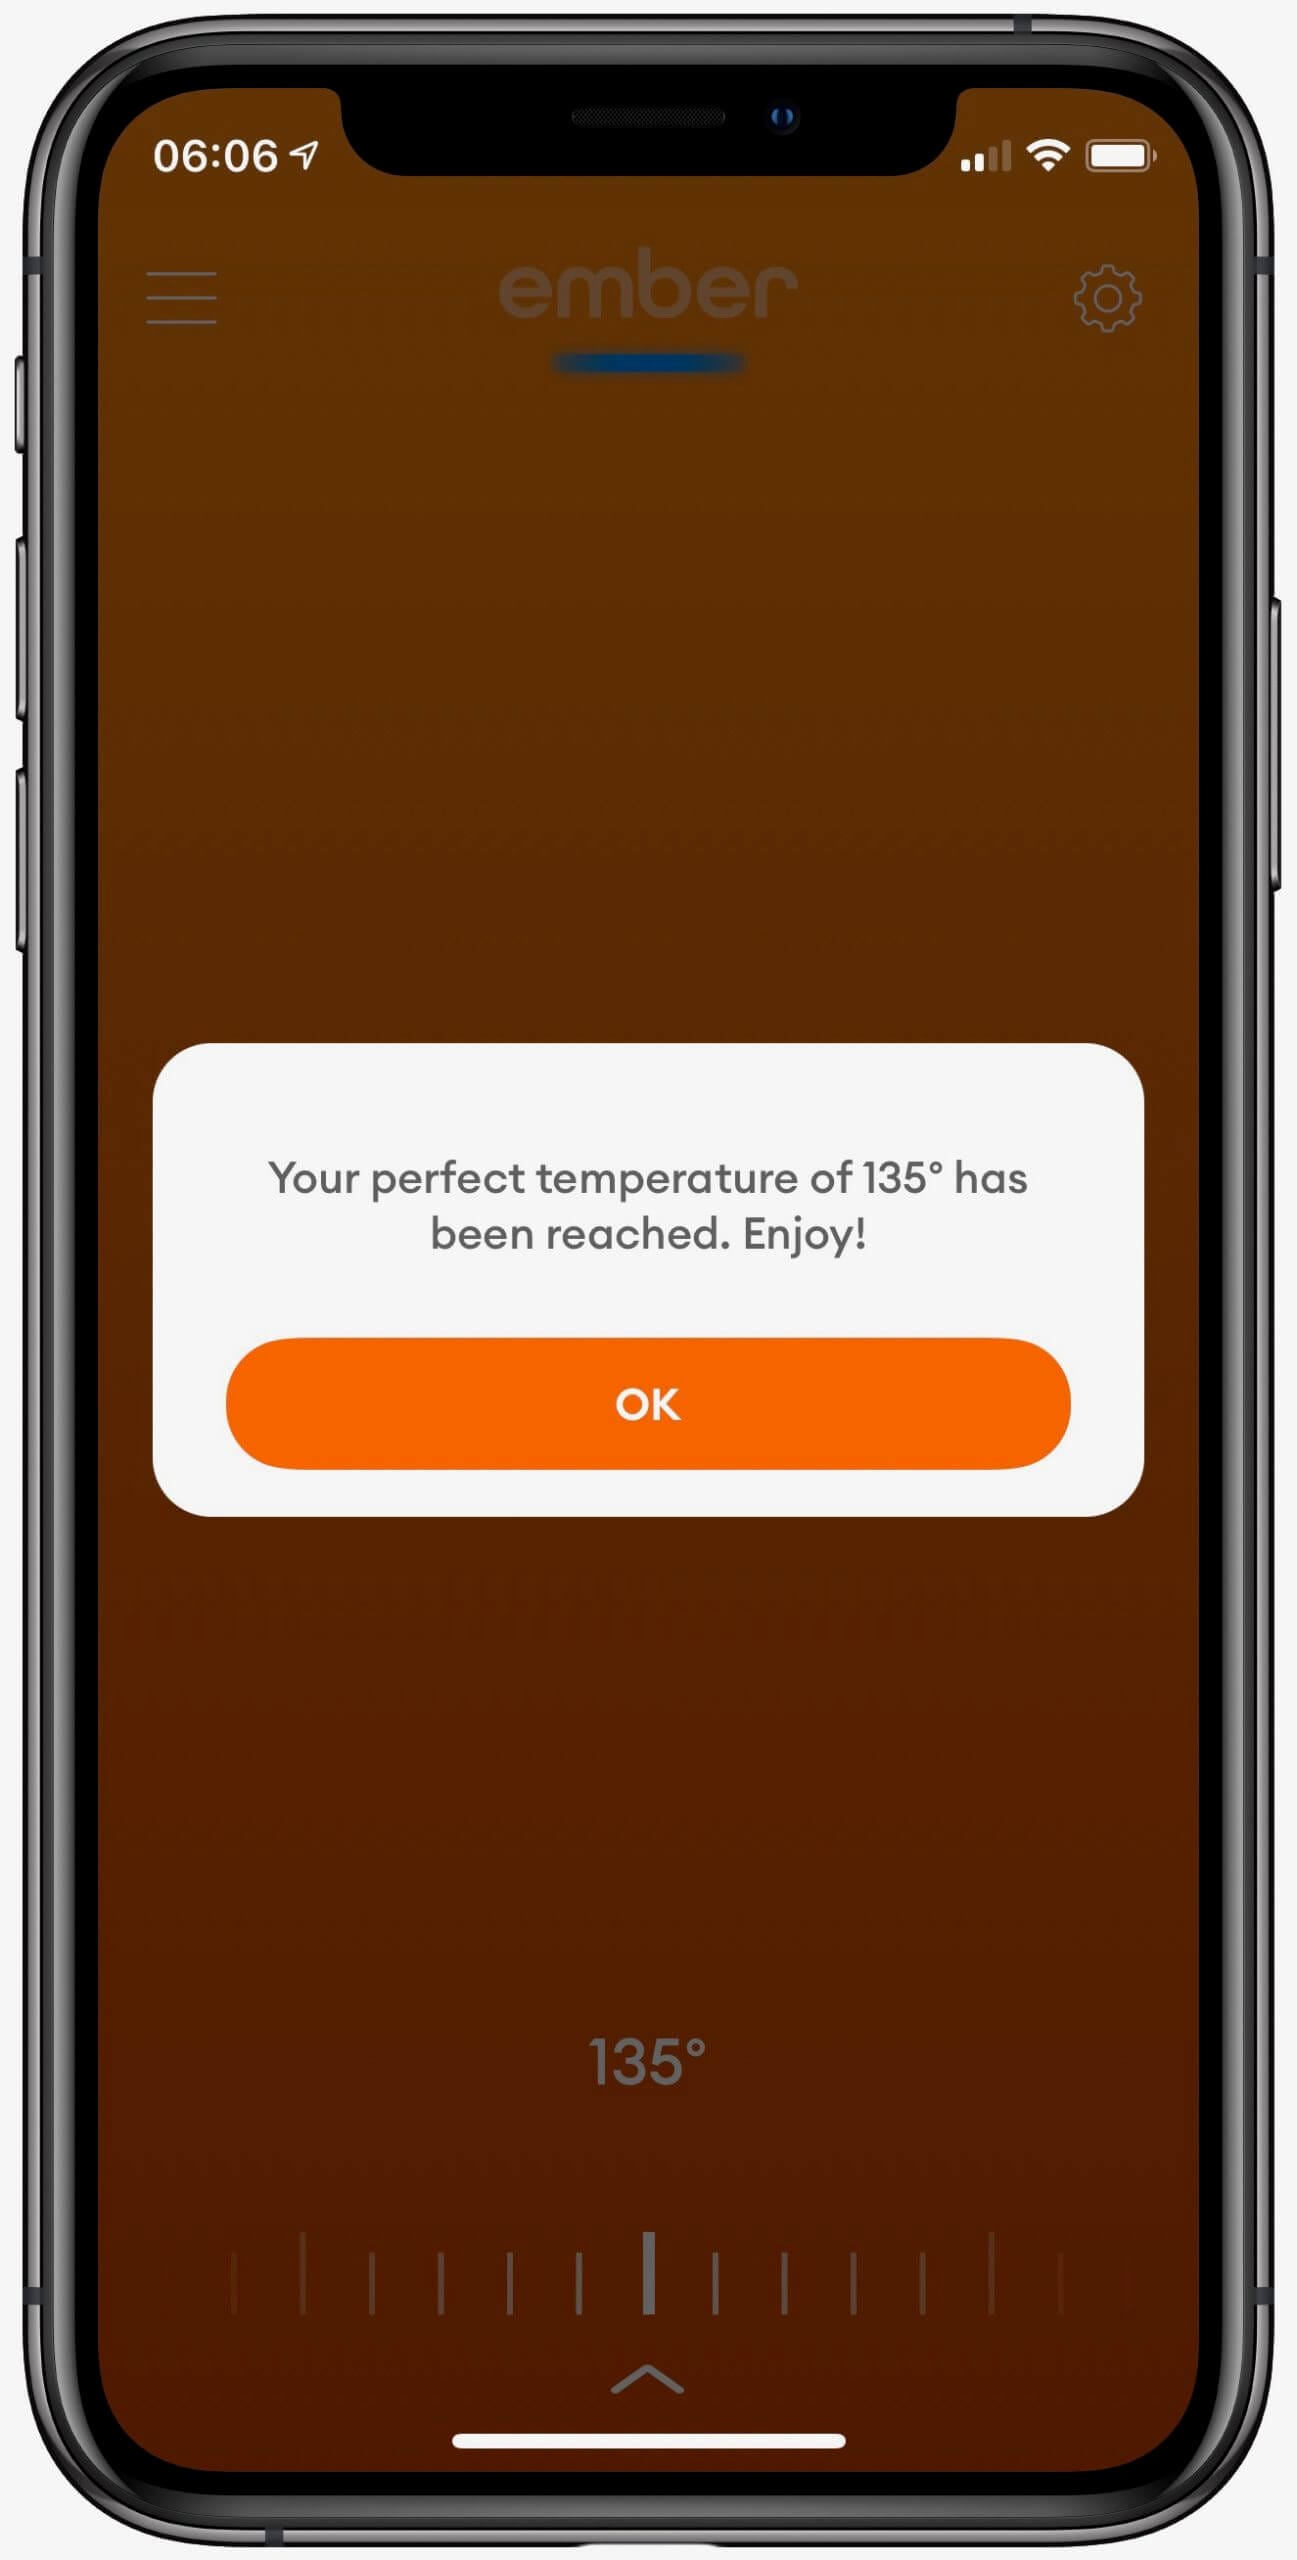 Ember App - A notification alerts you when your beverage has reached the perfect temperature